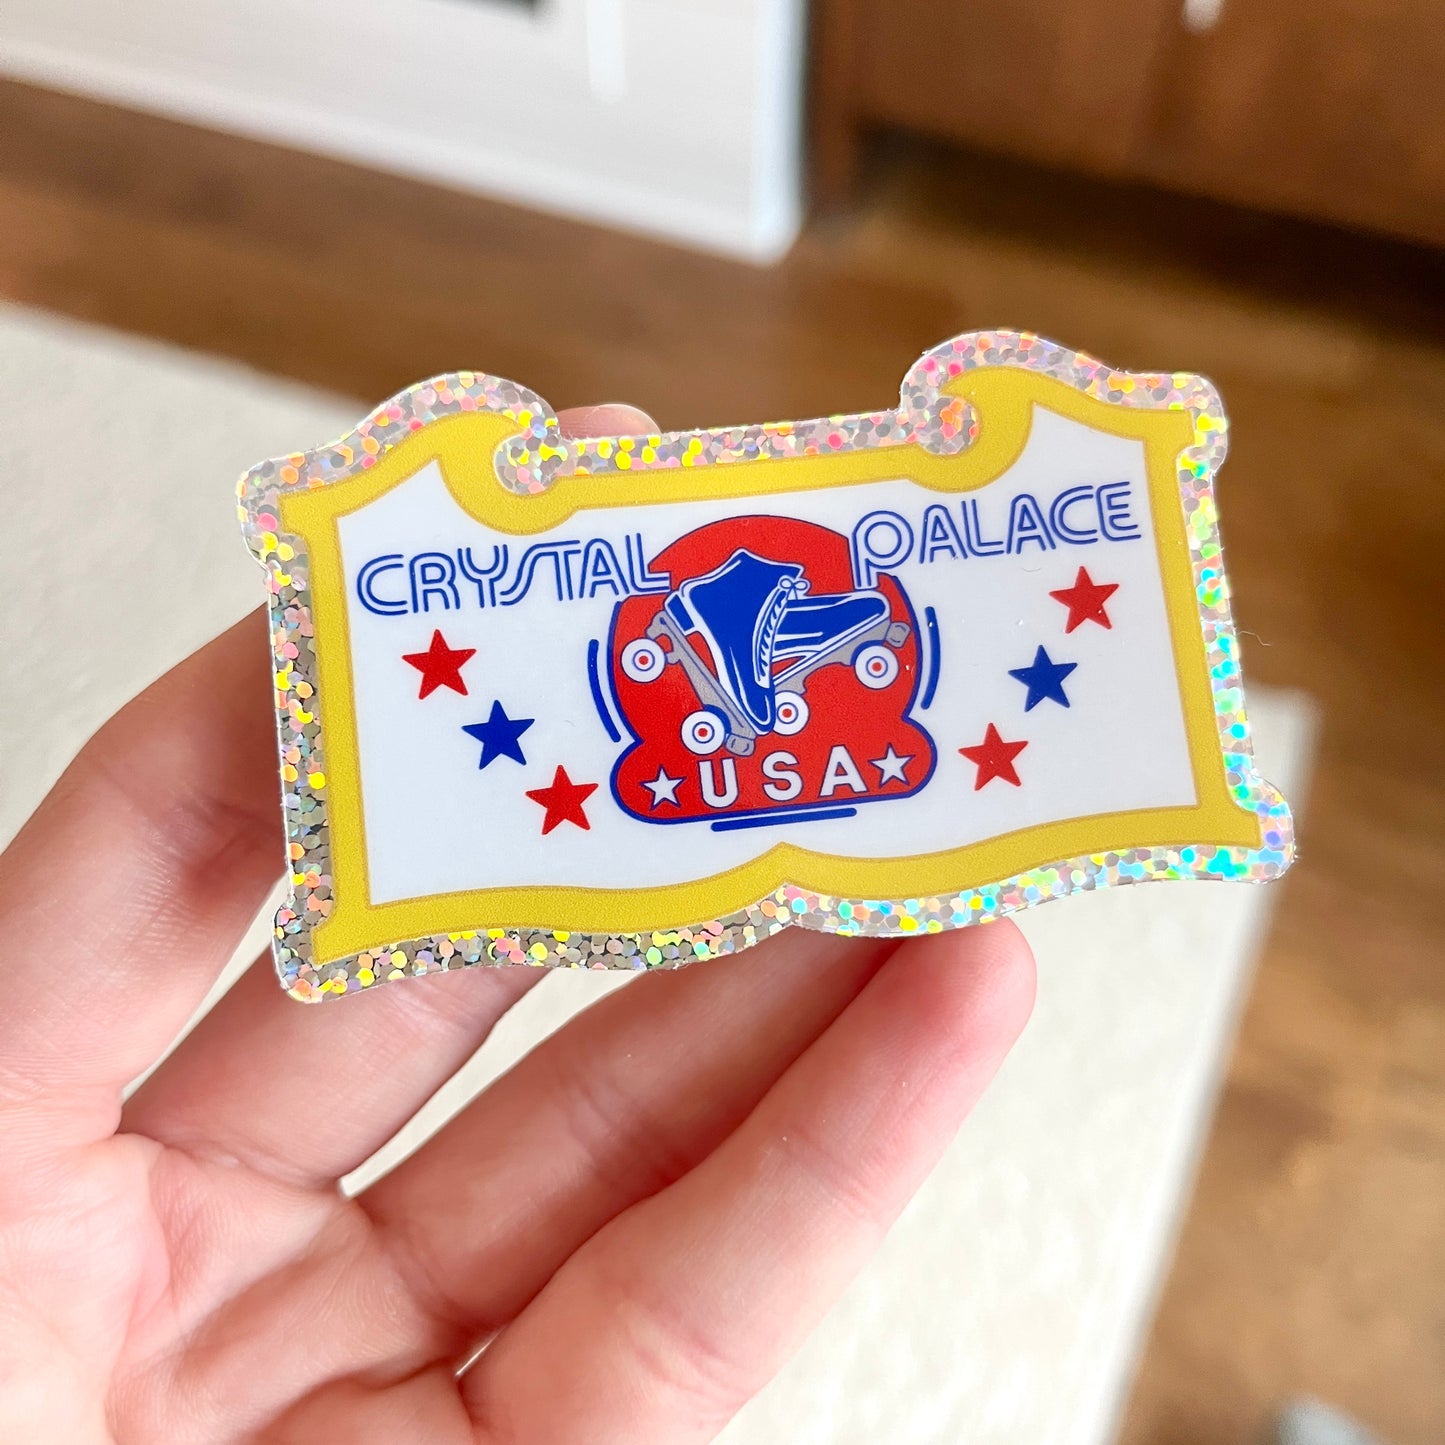 Crystal Palace Sticker with Glitter